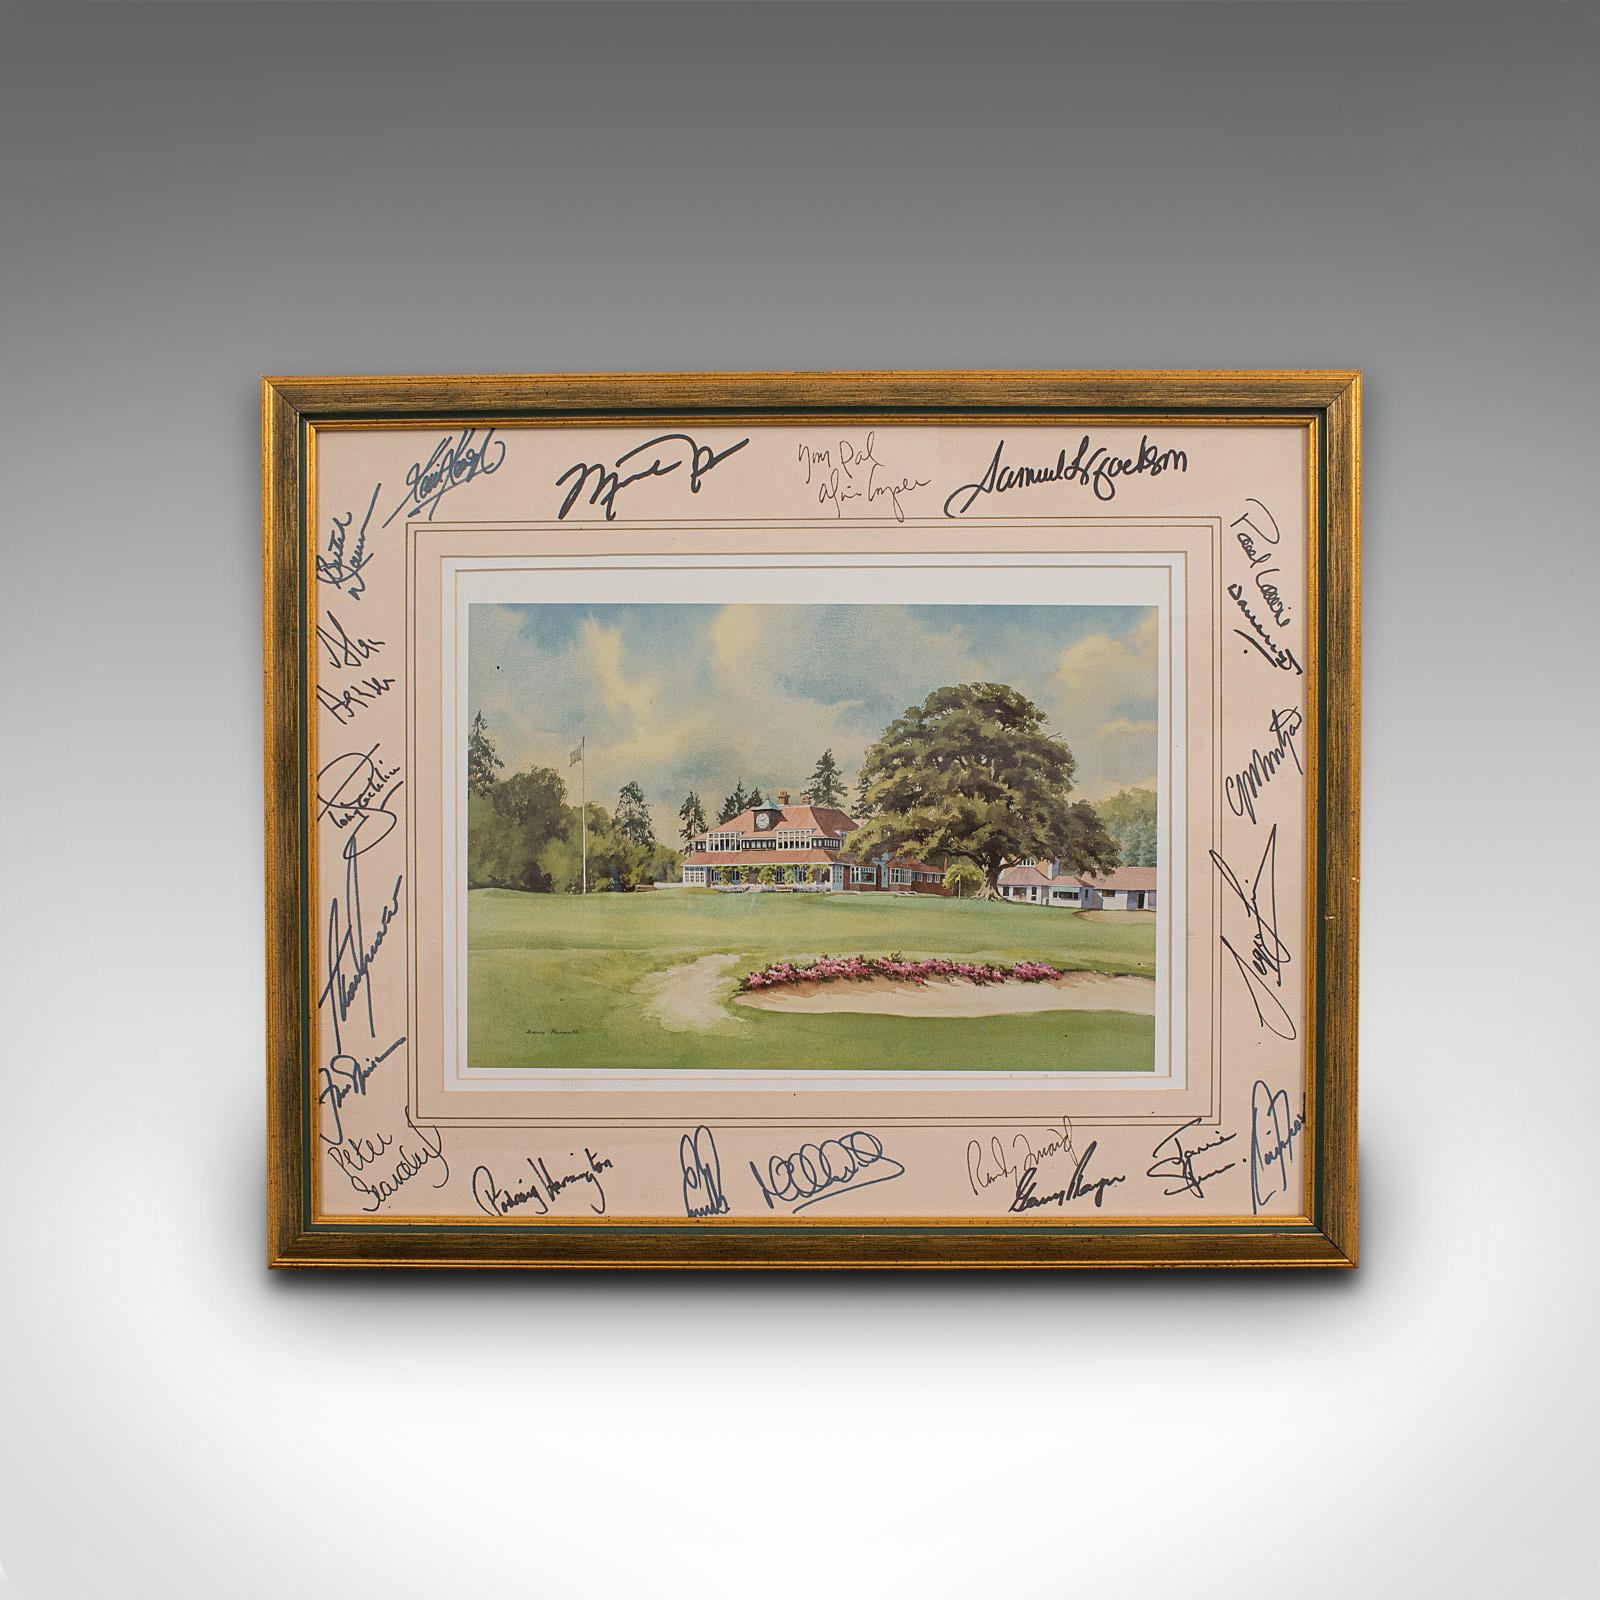 This is a rare, signed example of sports memorabilia depicting Sunningdale Golf Club. An English, framed print with celebrity signatures, dating to the 21st century.

Signed by a veritable who's-who of famous visitors to Sunningdale

Kevin